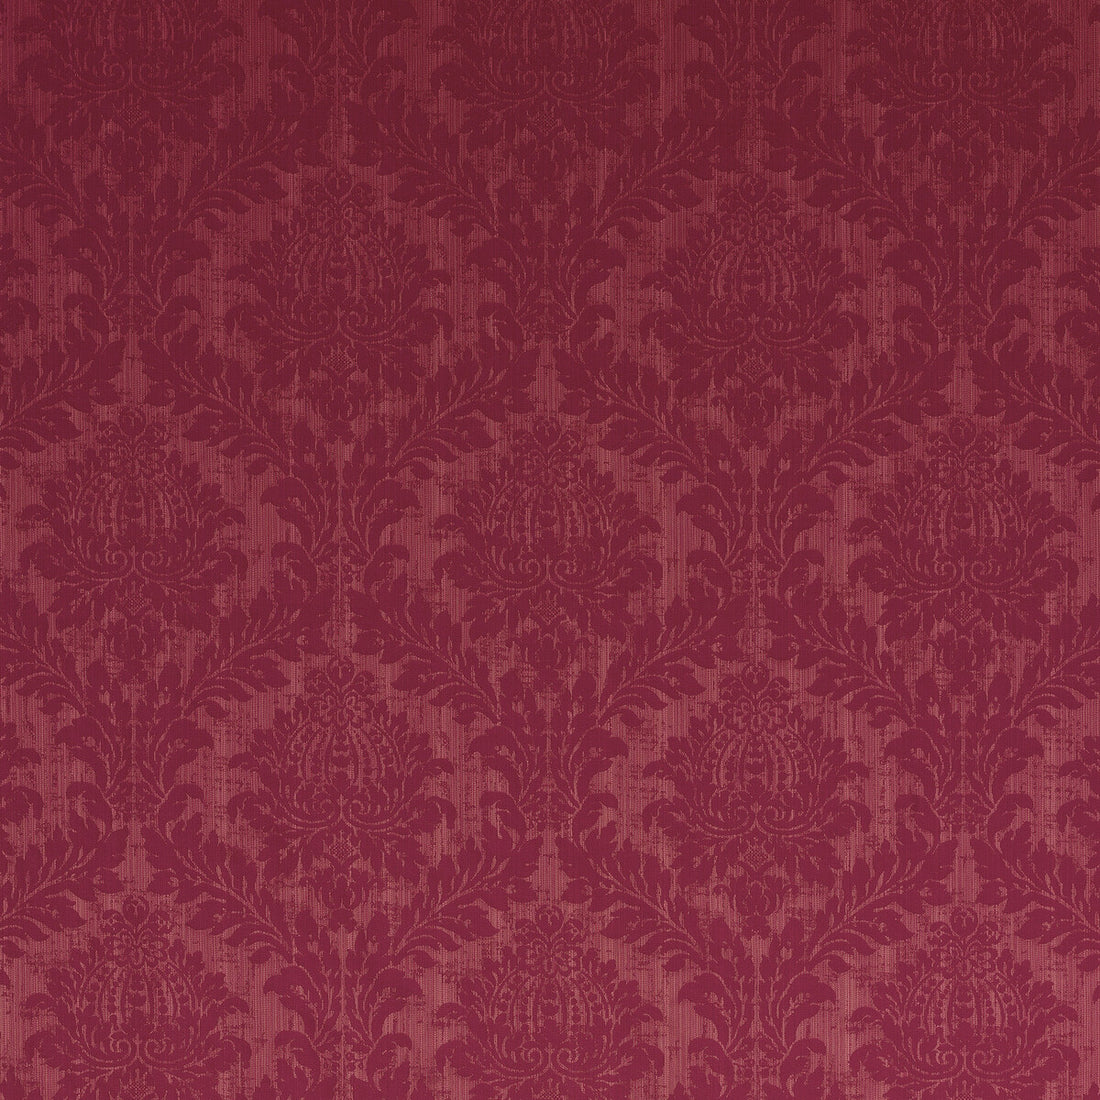 Lydford Damask fabric in ruby color - pattern BF10490.480.0 - by G P &amp; J Baker in the Simply Damask collection